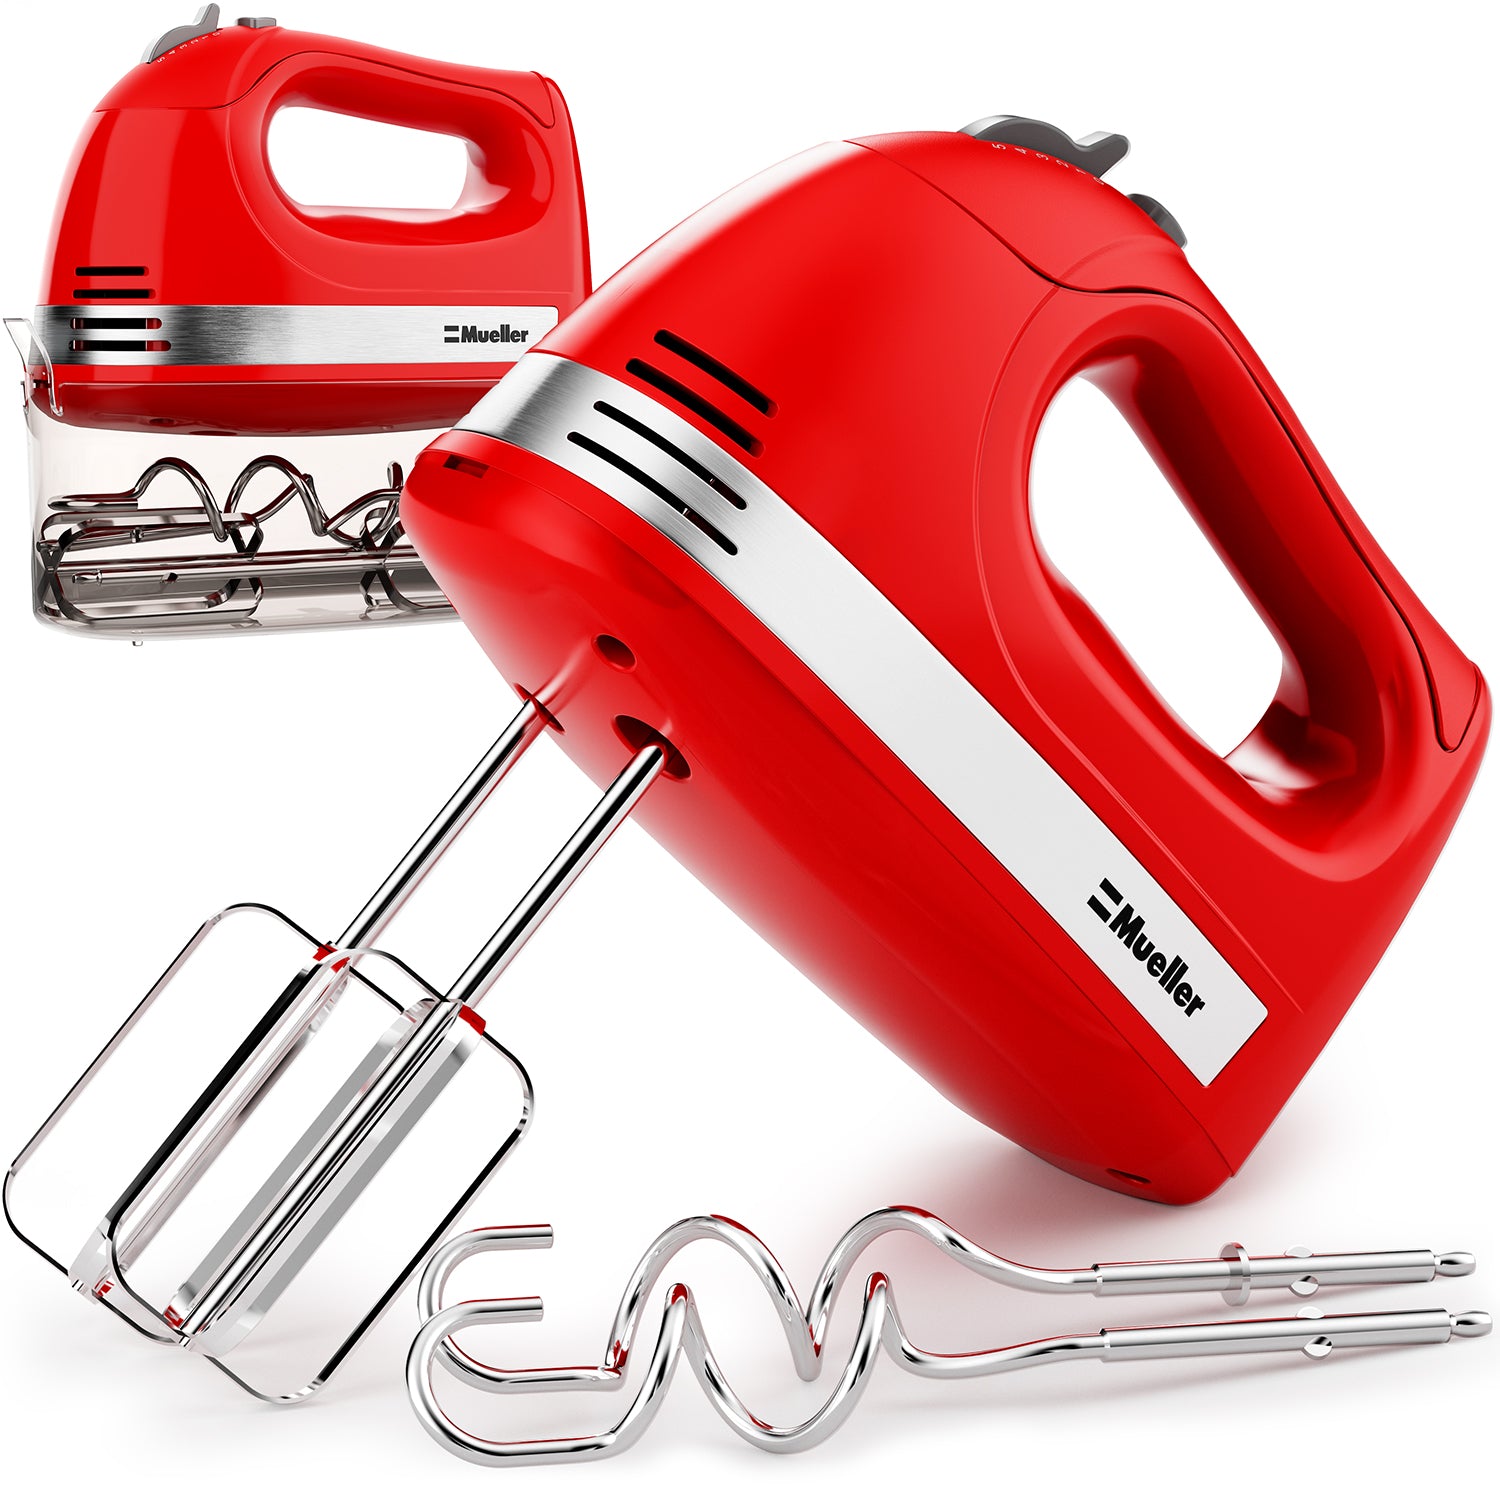 Musment 5-Speed Electric Hand Mixer, Beaters, Whisk, Red